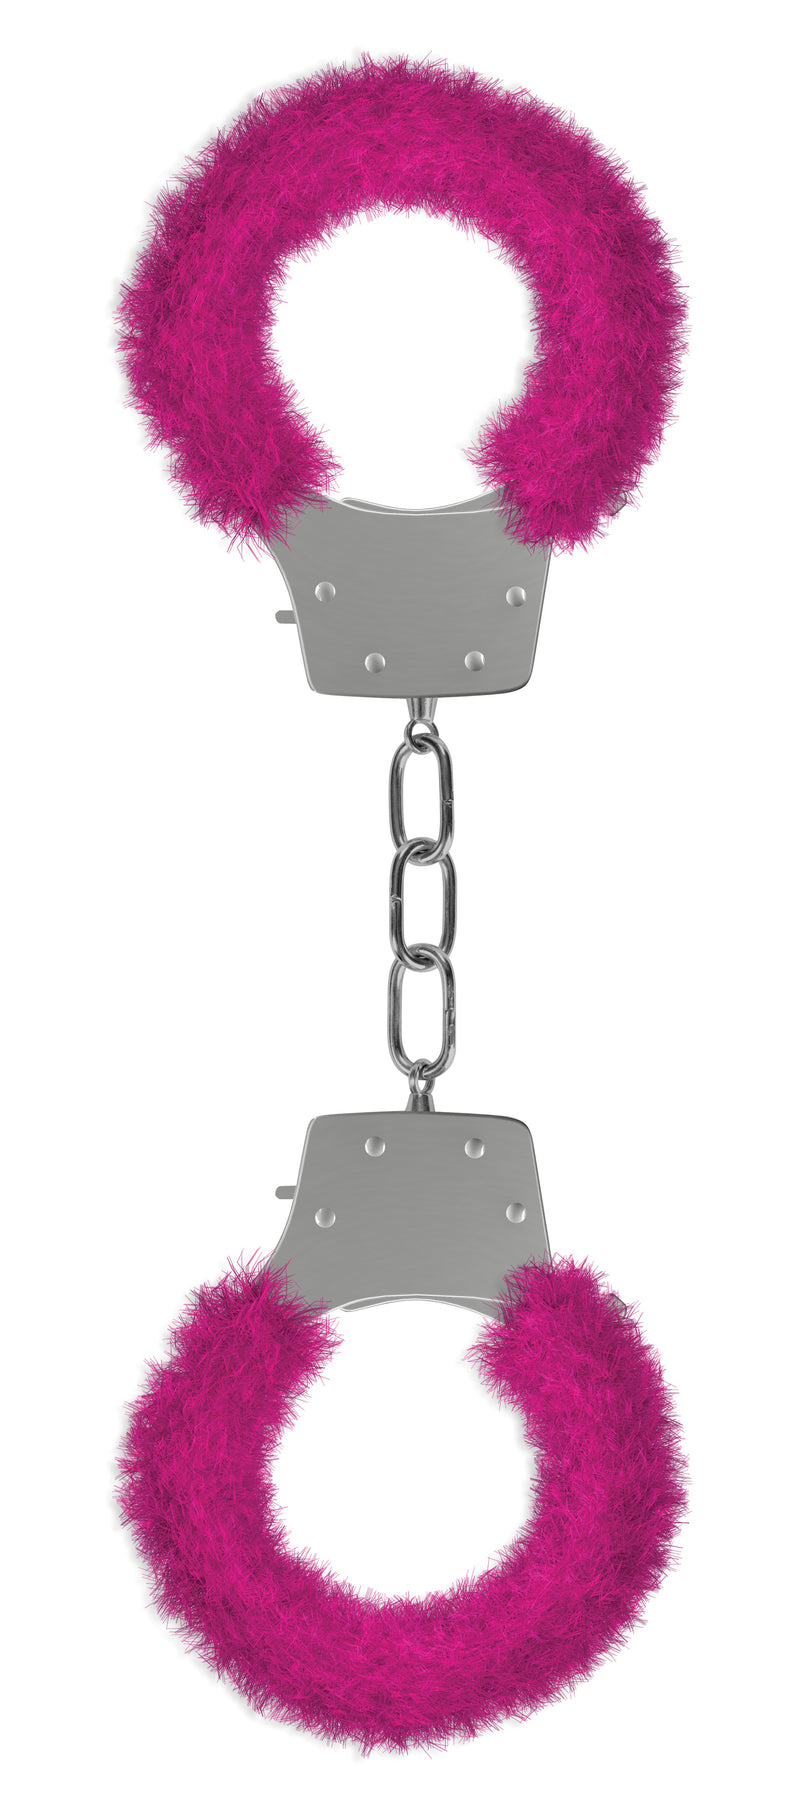 Furry Metal Handcuffs for Naughty Bedroom Fun - Quick Release Button Included!